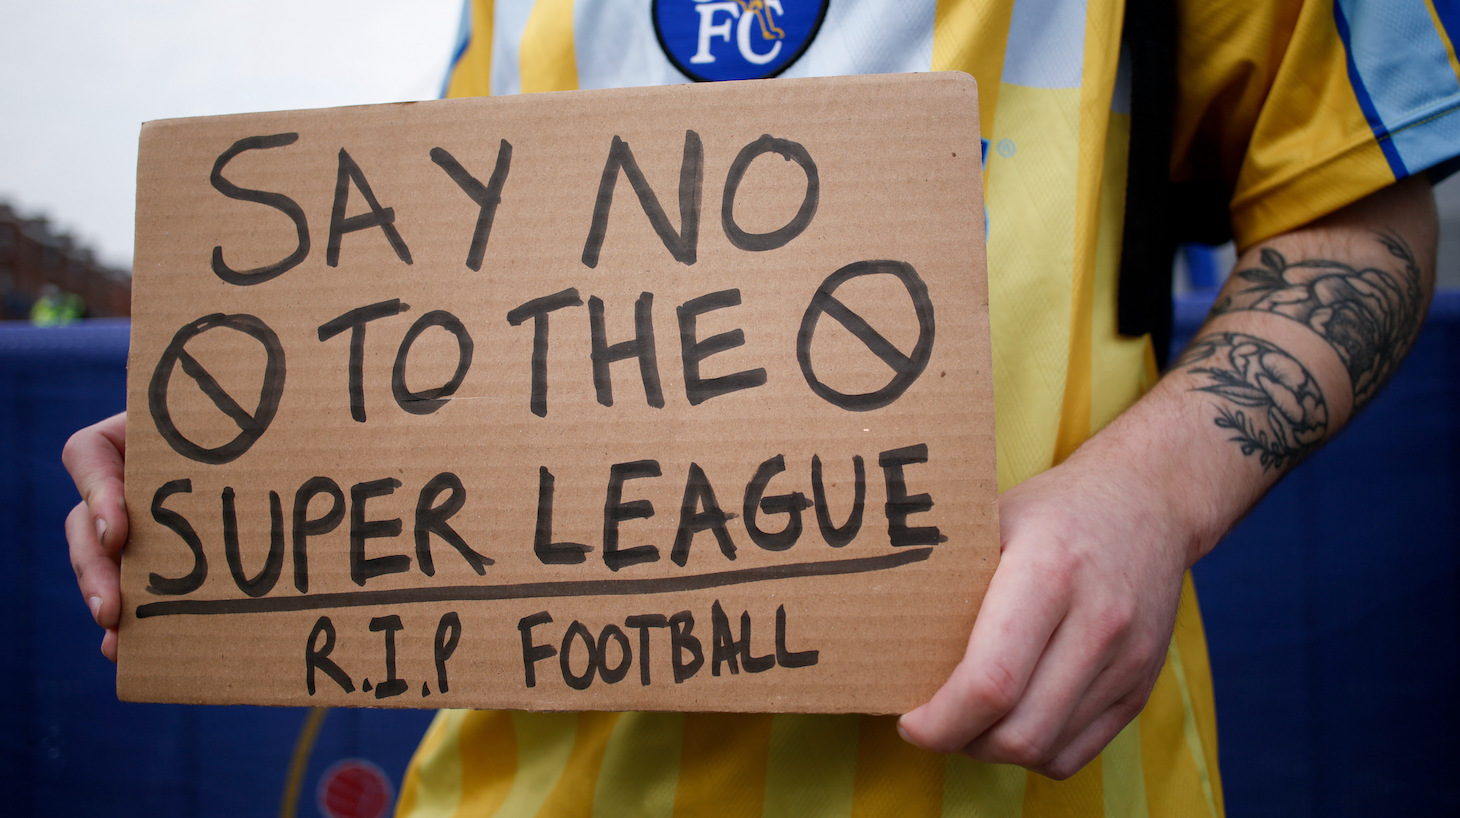 Fans protesting the establishment of the breakaway European Super League demonstrate outside Stamford Bridge stadium, home of Chelsea Football Club, in London, United Kingdom on April 20, 2021. Chelsea is one of six English Premier League clubs to have signed up to the planned midweek competition, announced on Sunday night in defiance of condemnation from football authorities and political leaders including British Prime Minister Boris Johnson and French President Emmanuel Macron.